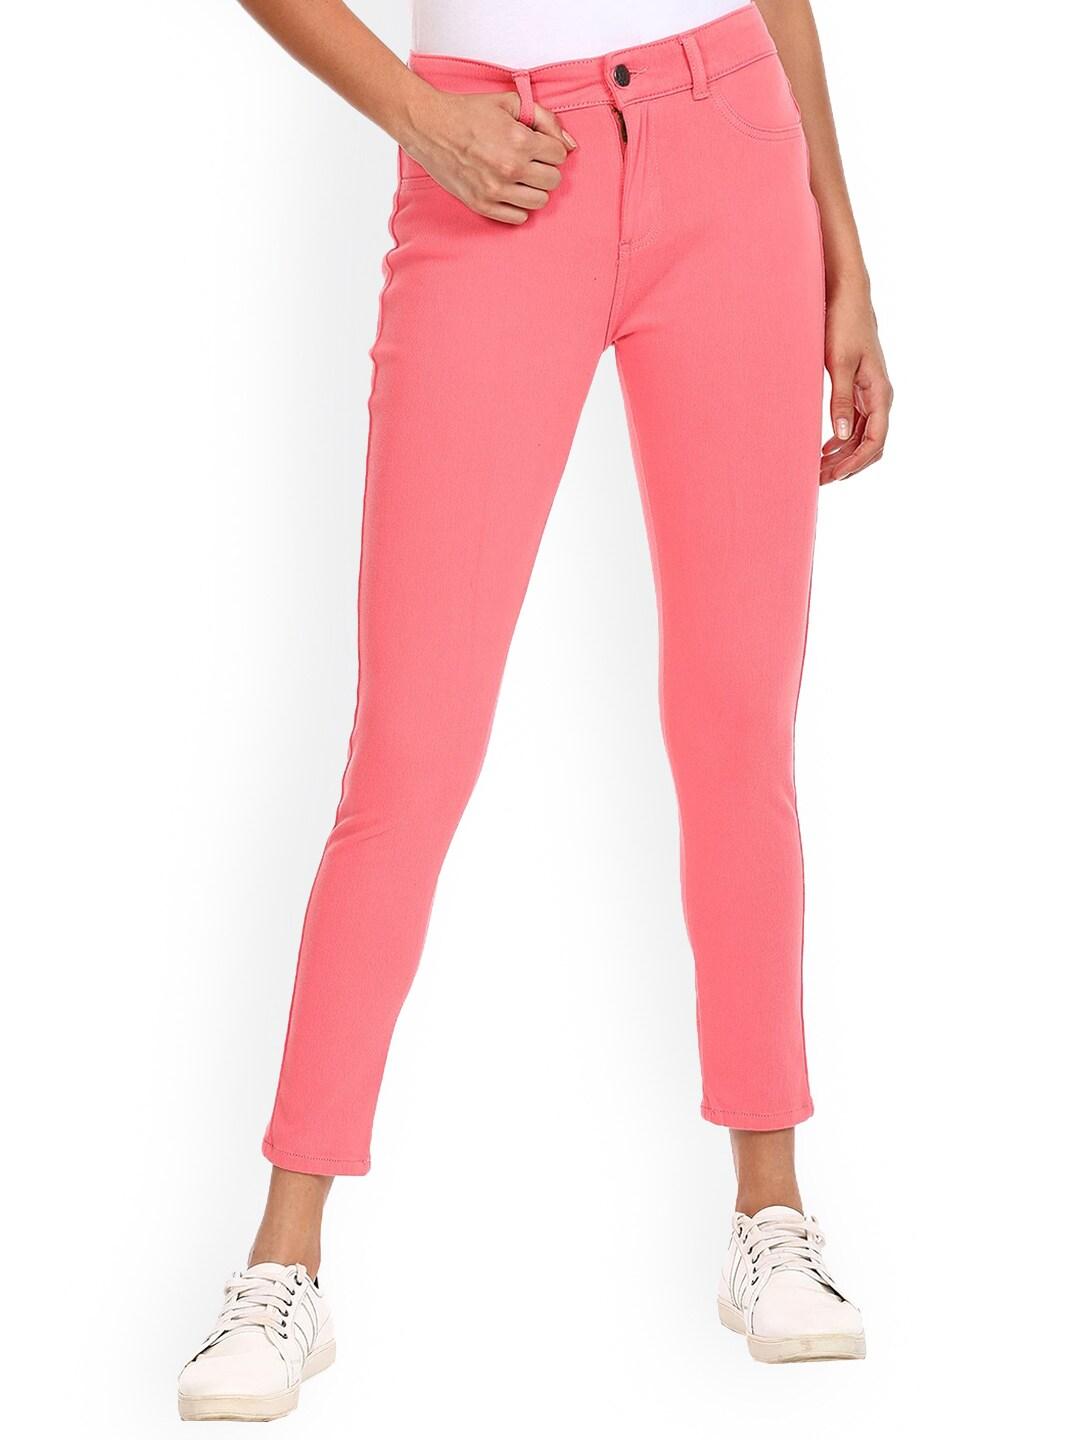 sugr-women-pink-mid-rise-solid-jeggings